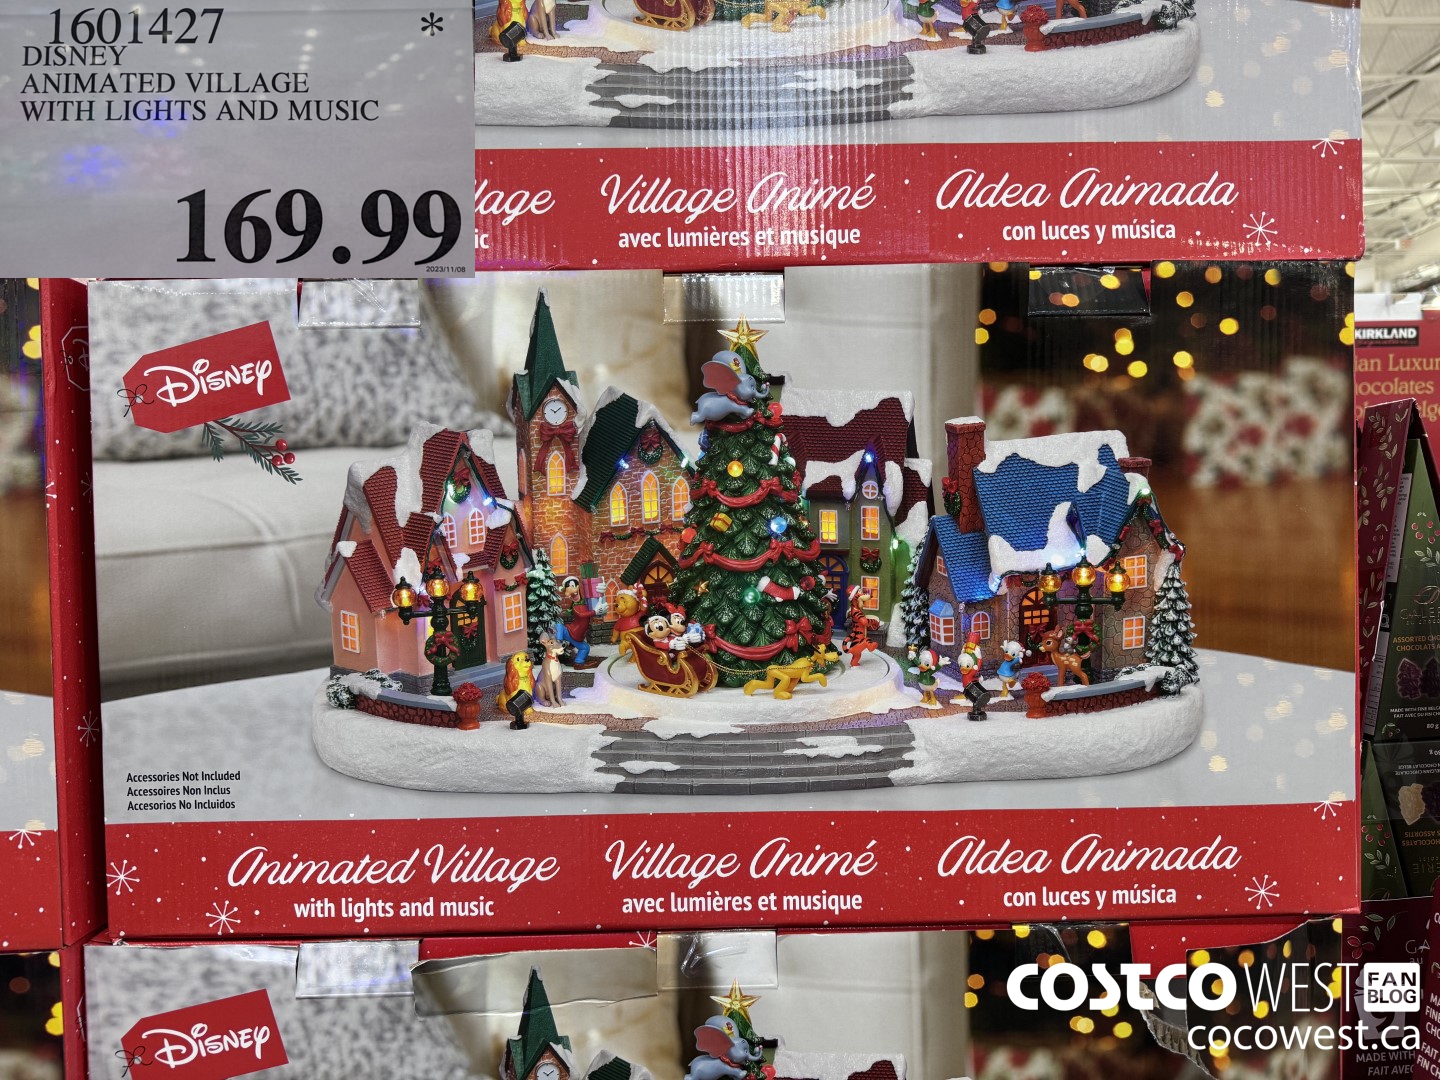 Costco Christmas: Best Deals & When To Shop - The Krazy Coupon Lady